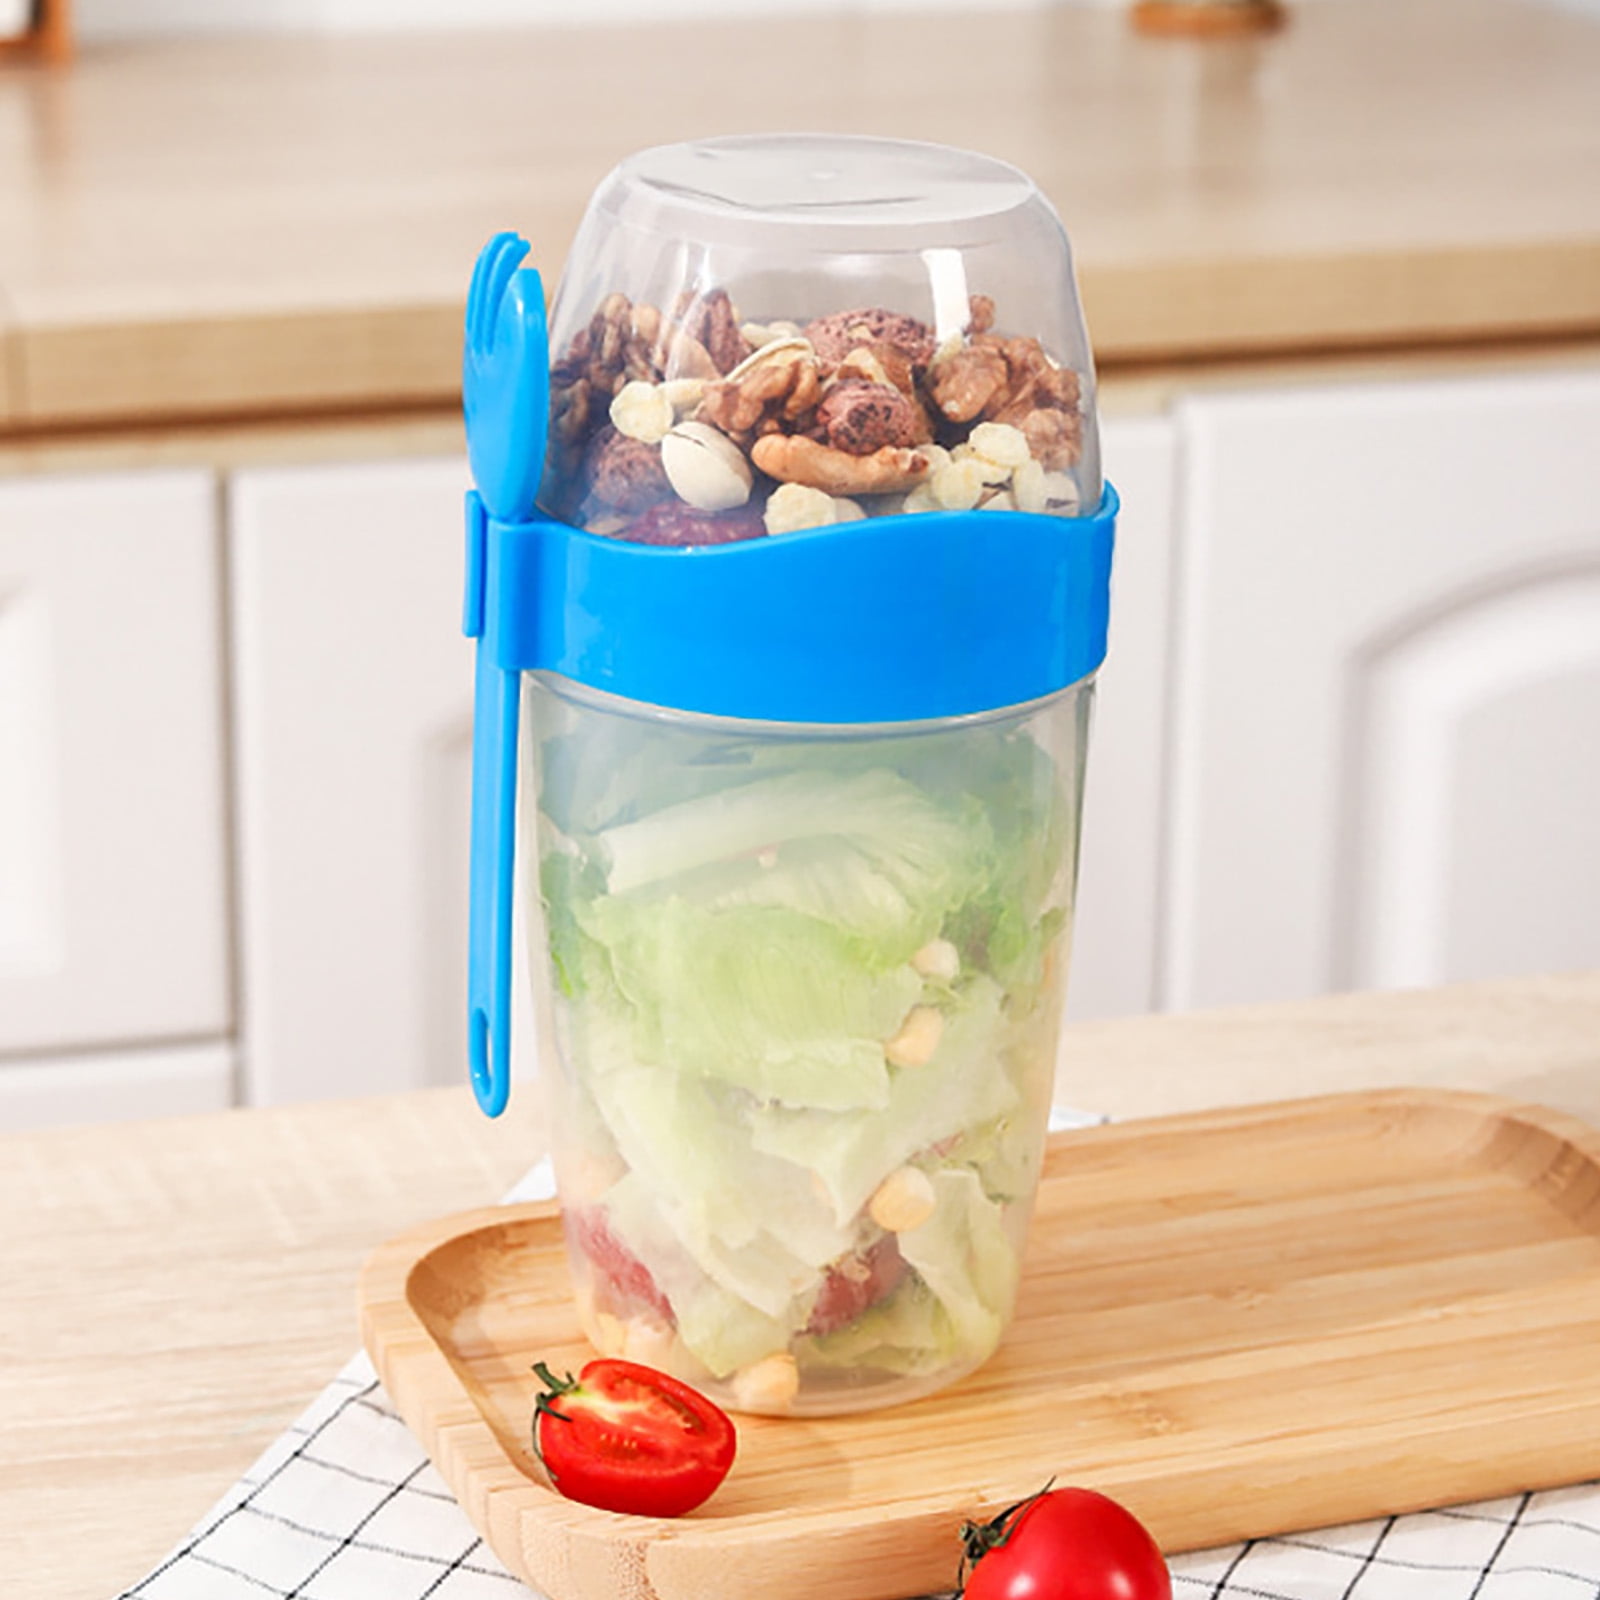 1pc Breakfast To-go Cup, 1pc Yogurt To-go Cup, 1pc Oatmeal Cup With Fork,  1pc Overnight Oats Container, 1pc Reusable Portable Yogurt Snack Container,  1pc Fruit And Vegetable Snack Cup